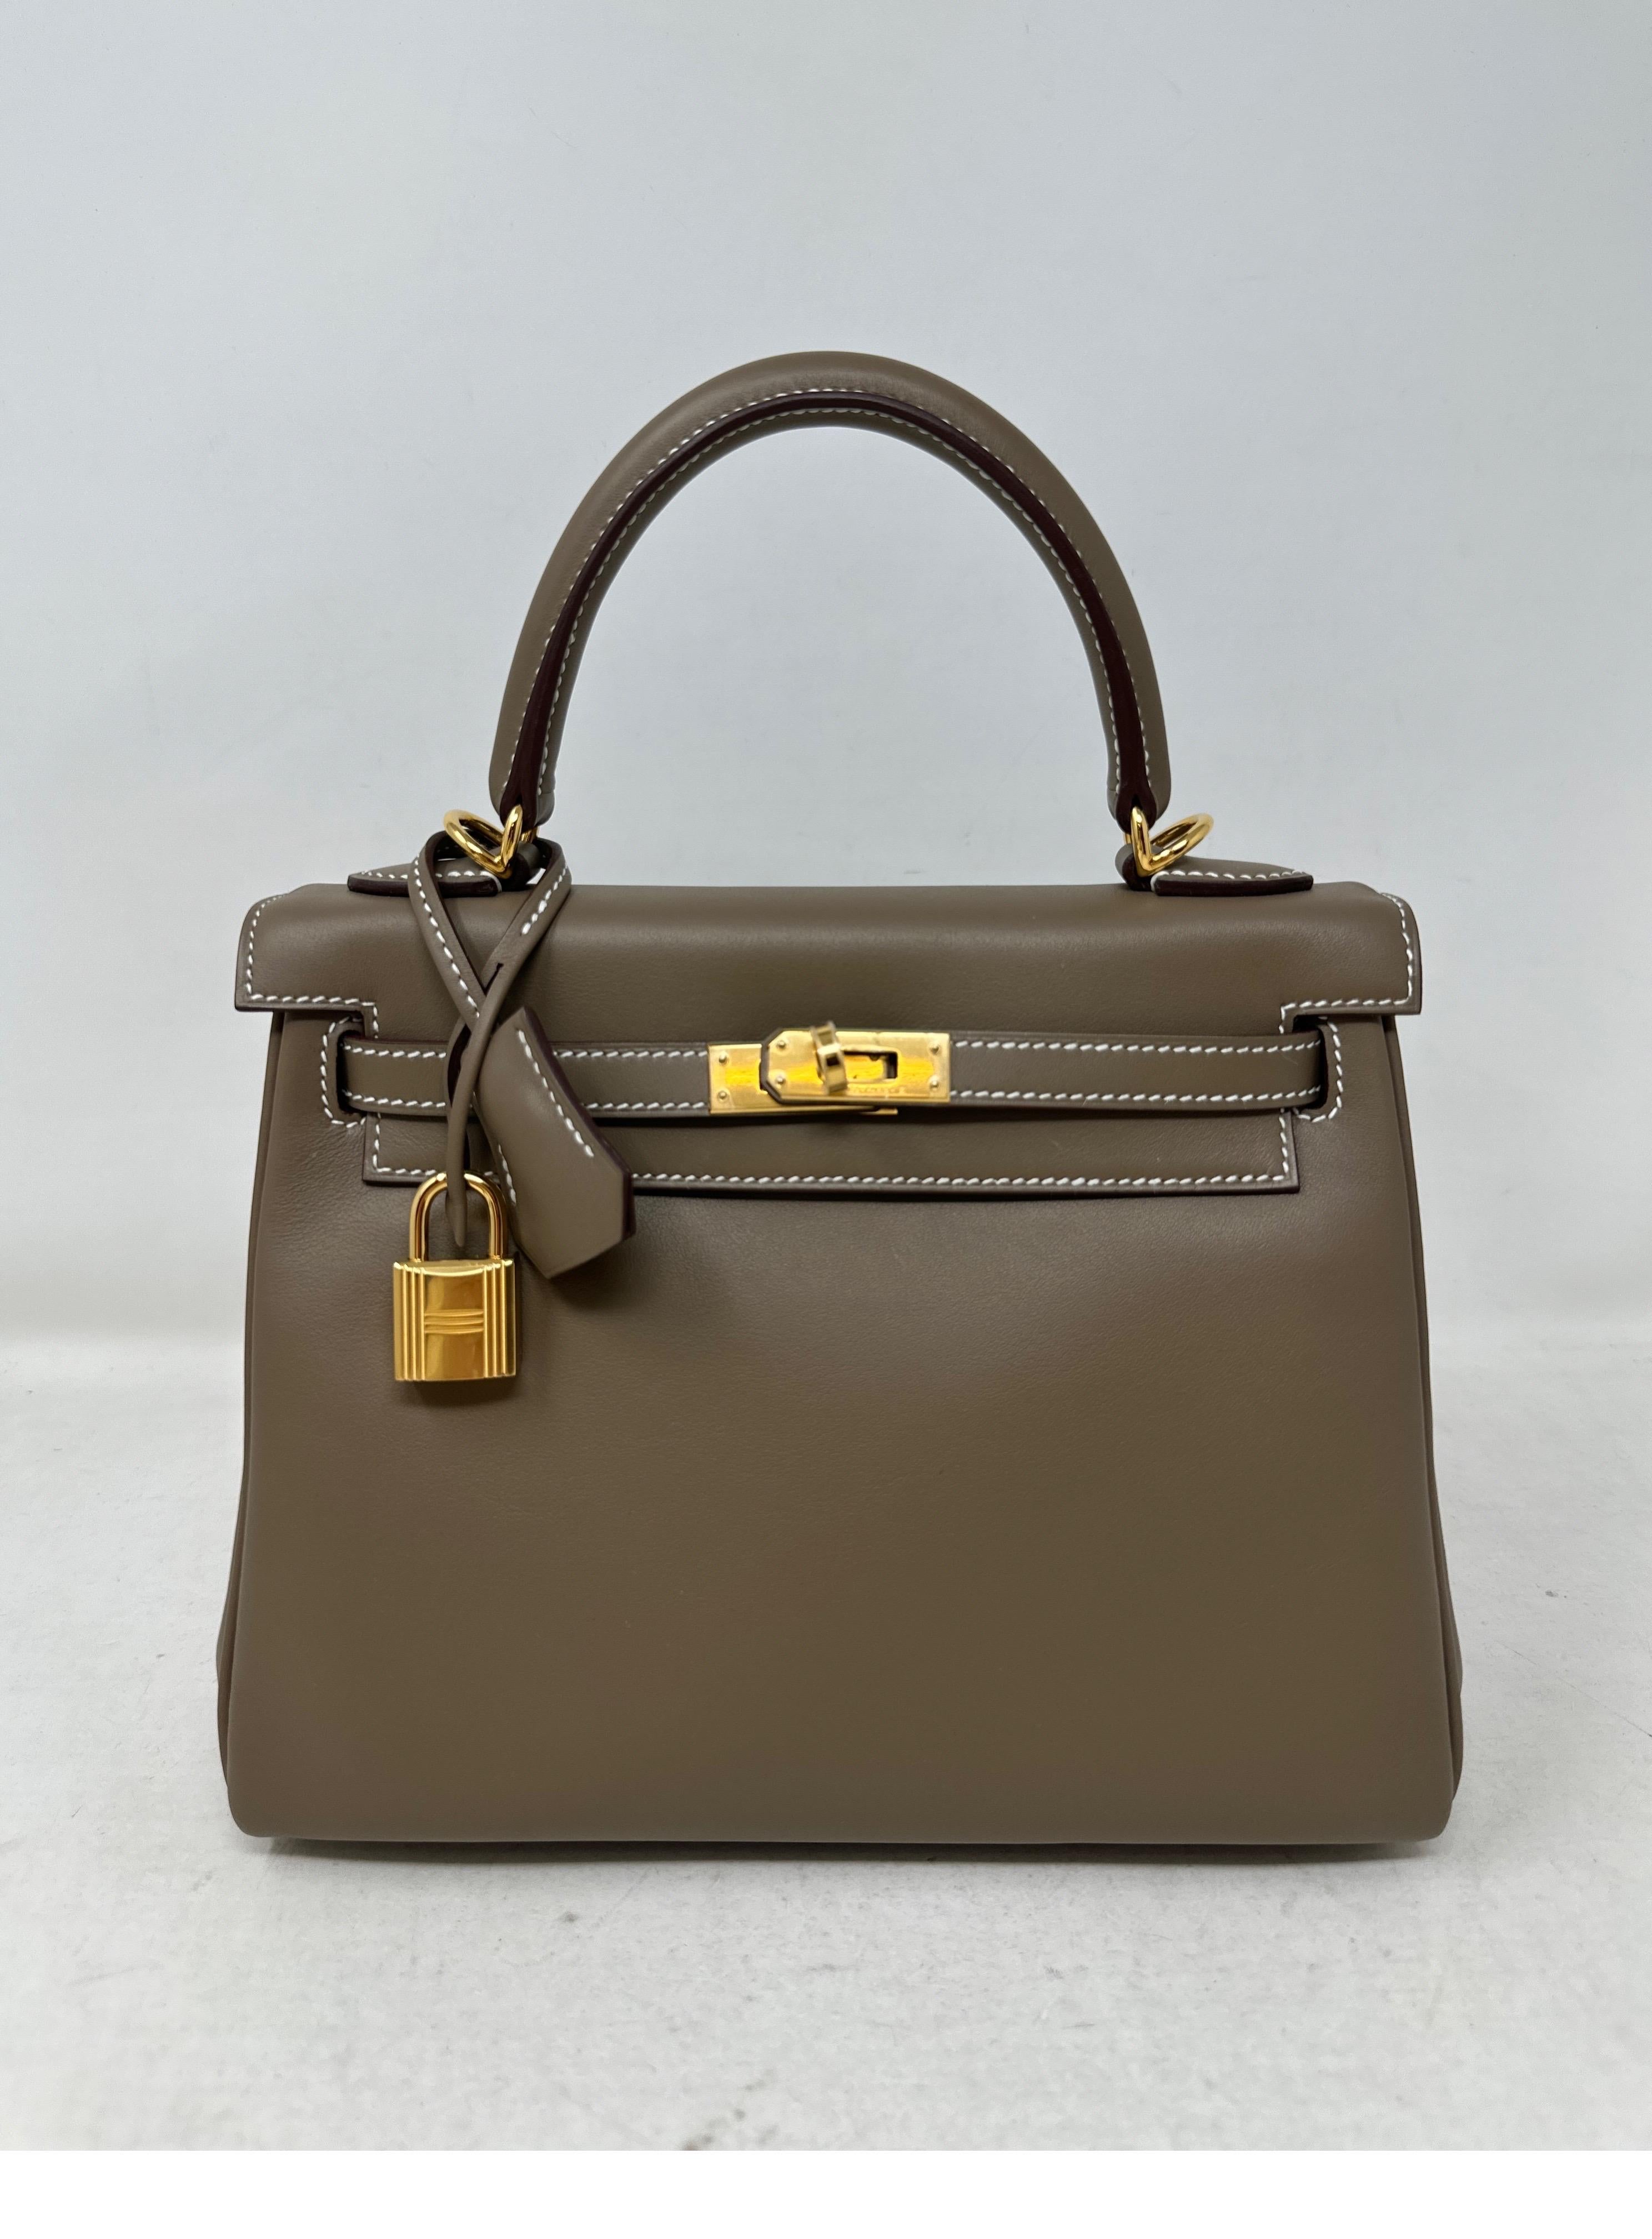 Hermes Etoupe Swift Kelly 25 Bag. Brand new 2023 Kelly 25 Bag. Stunning smooth swift leather. Hard to get etoupe color. Great neutral color. Gold hardware. Rare small size 25 Kelly. Includes full set with original receipt. Box and dust bag included.